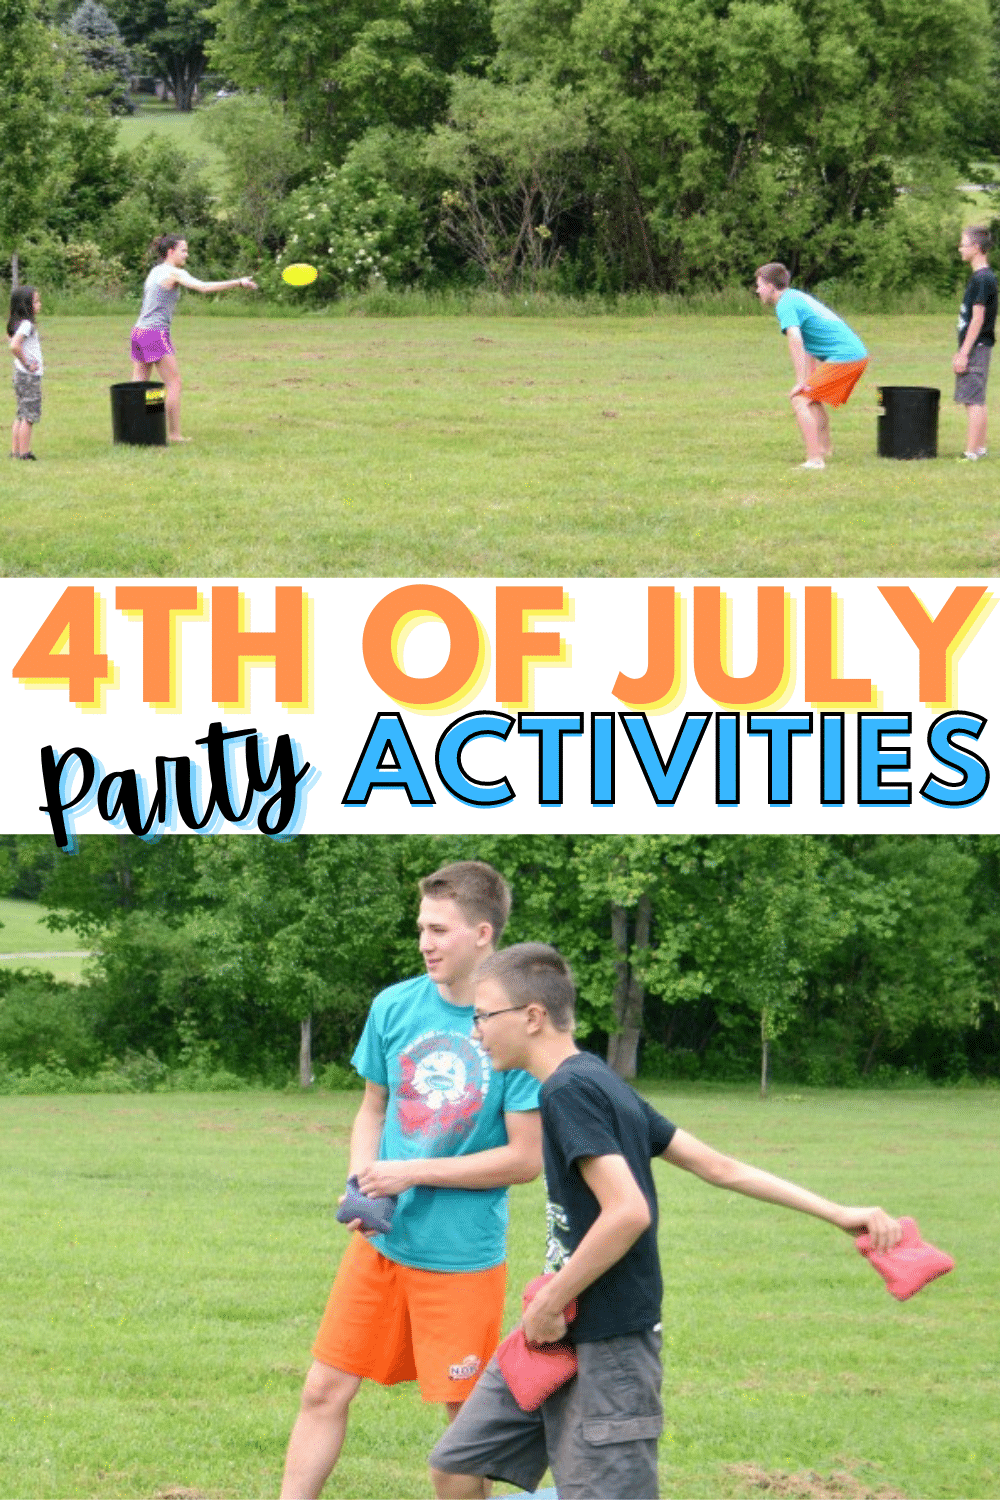 If you plan on celebrating Independence Day at home, check out this list of things to remember including recommended 4th of July party activities. #independenceday #4thofJuly #partyactivities #4thofJulyparty via @wondermomwannab